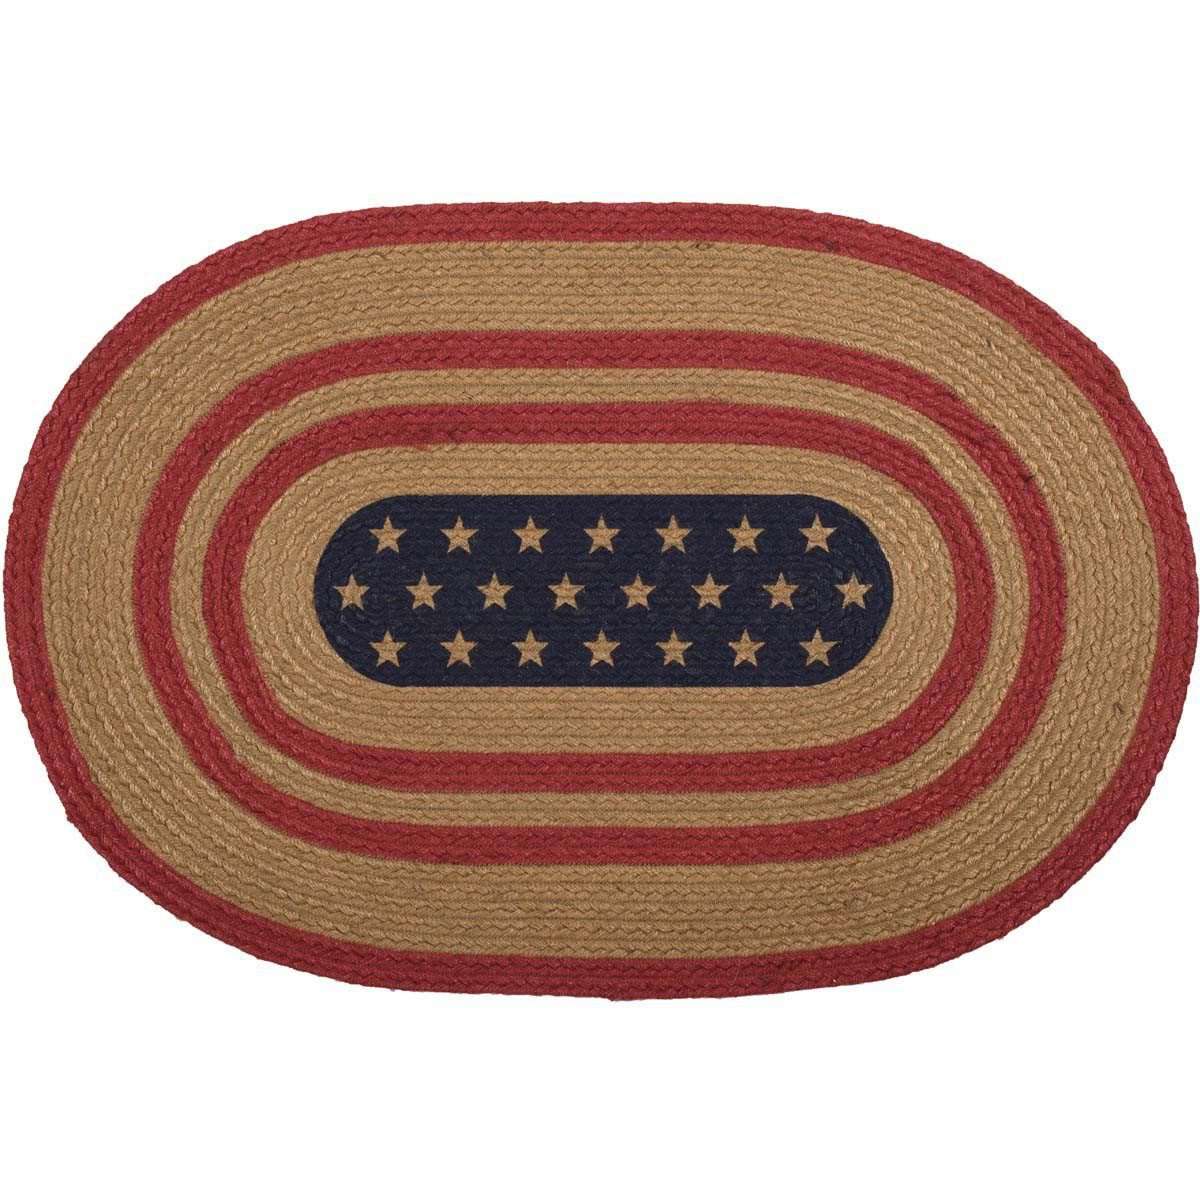 Liberty Stars Flag Jute Braided Rugs Oval/Half Circle VHC Brands rugs VHC Brands 20x30 inch Oval 